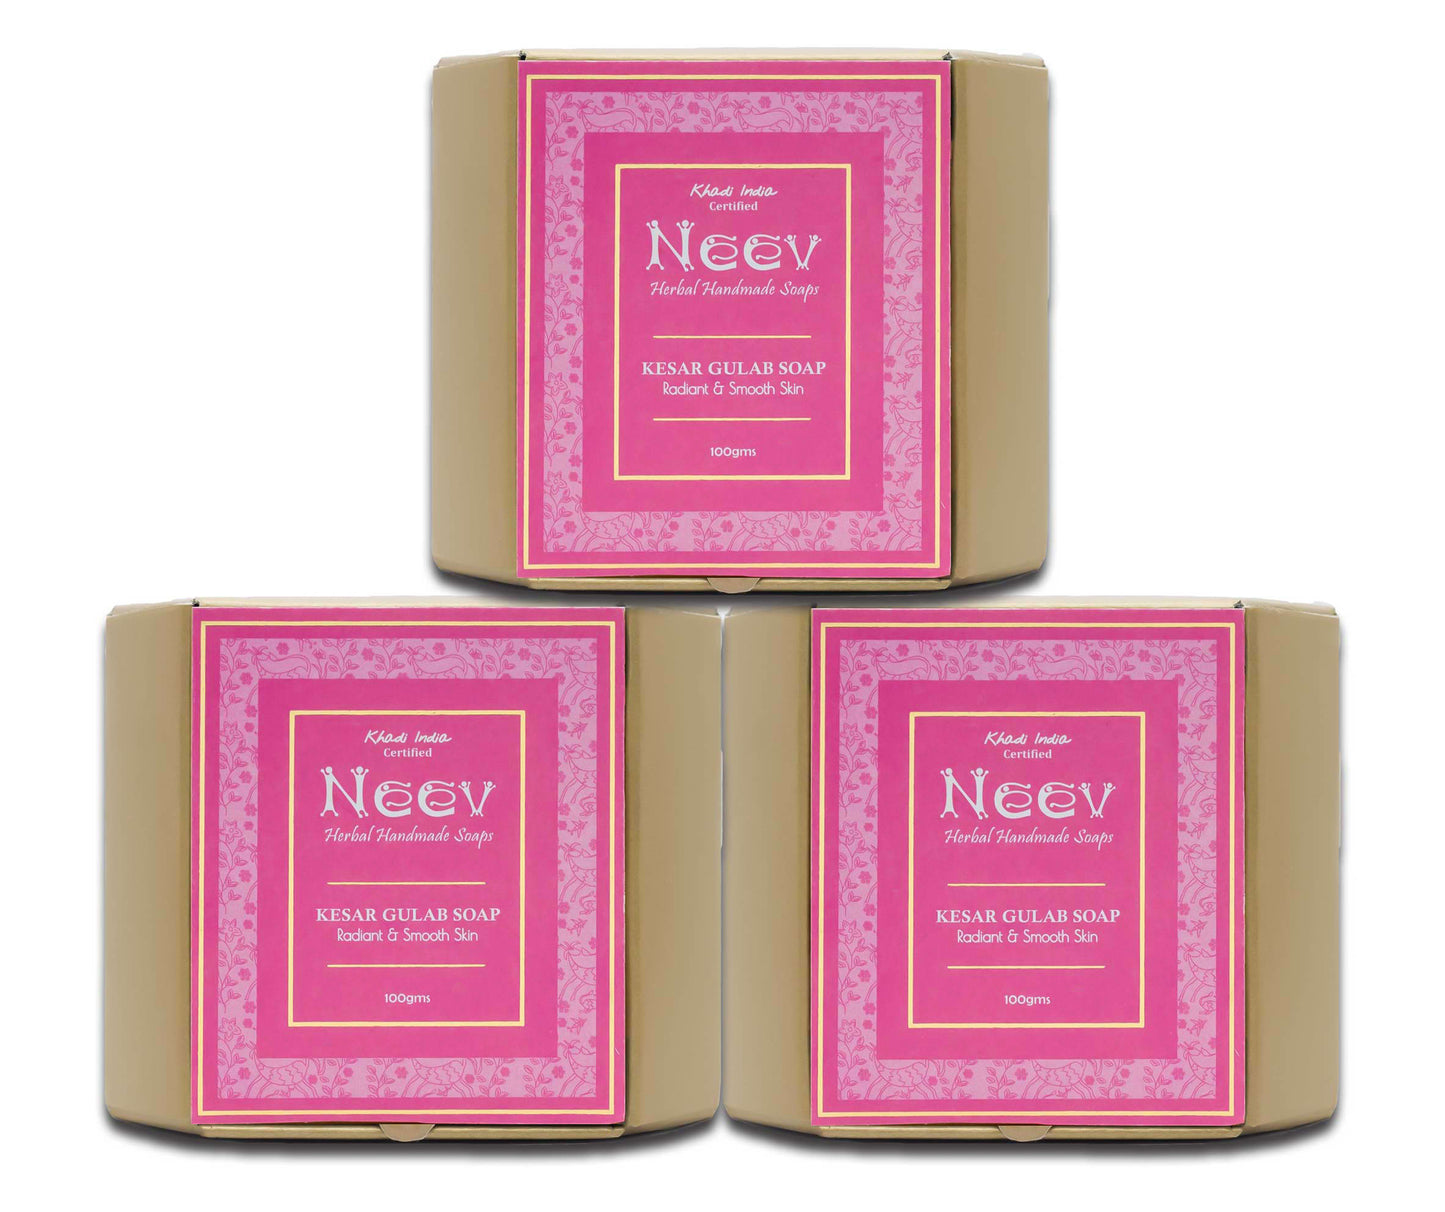 Kesar Gulab Soap For a Radiant and Smooth Skin - Set of 3